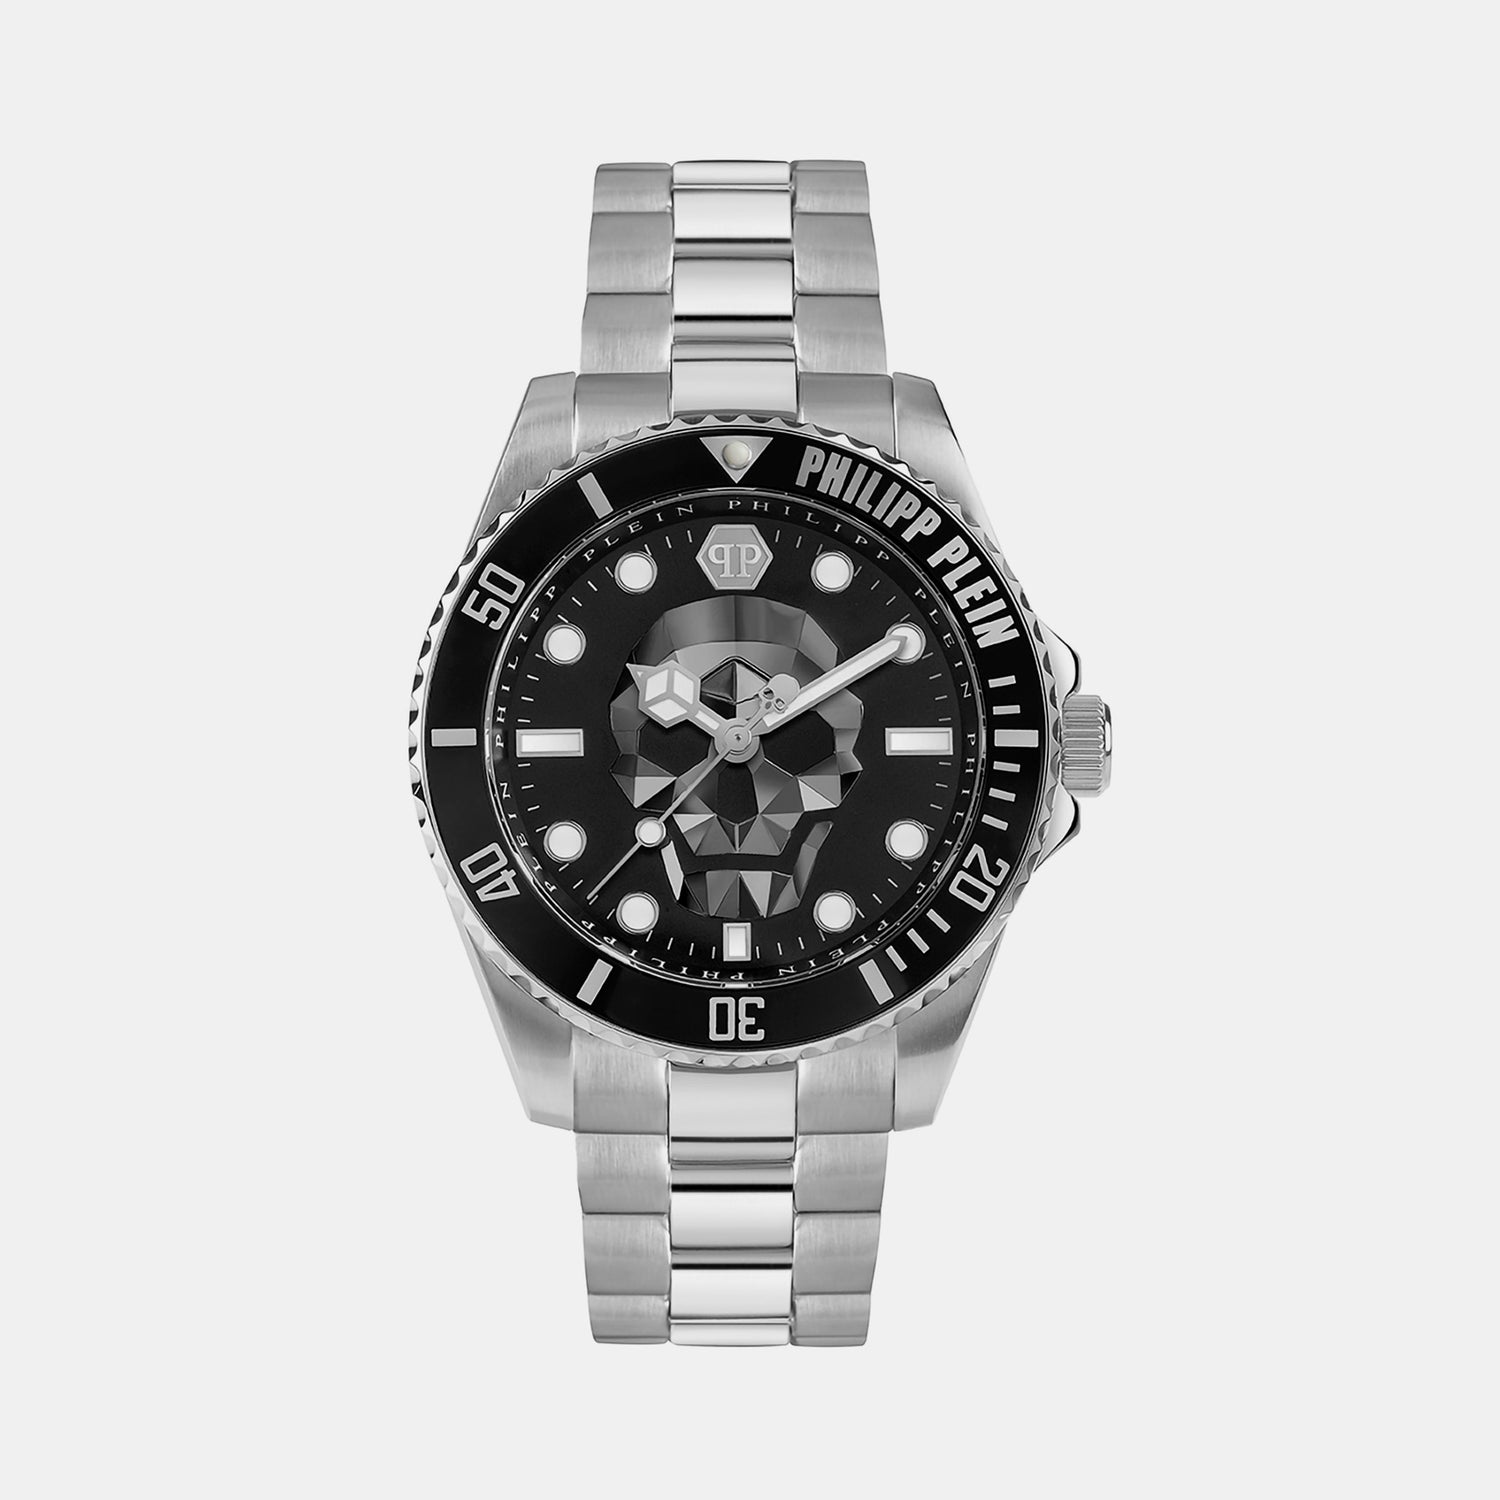 The $Kull Diver Male Black Analog Stainless Steel Watch PWOAA0522